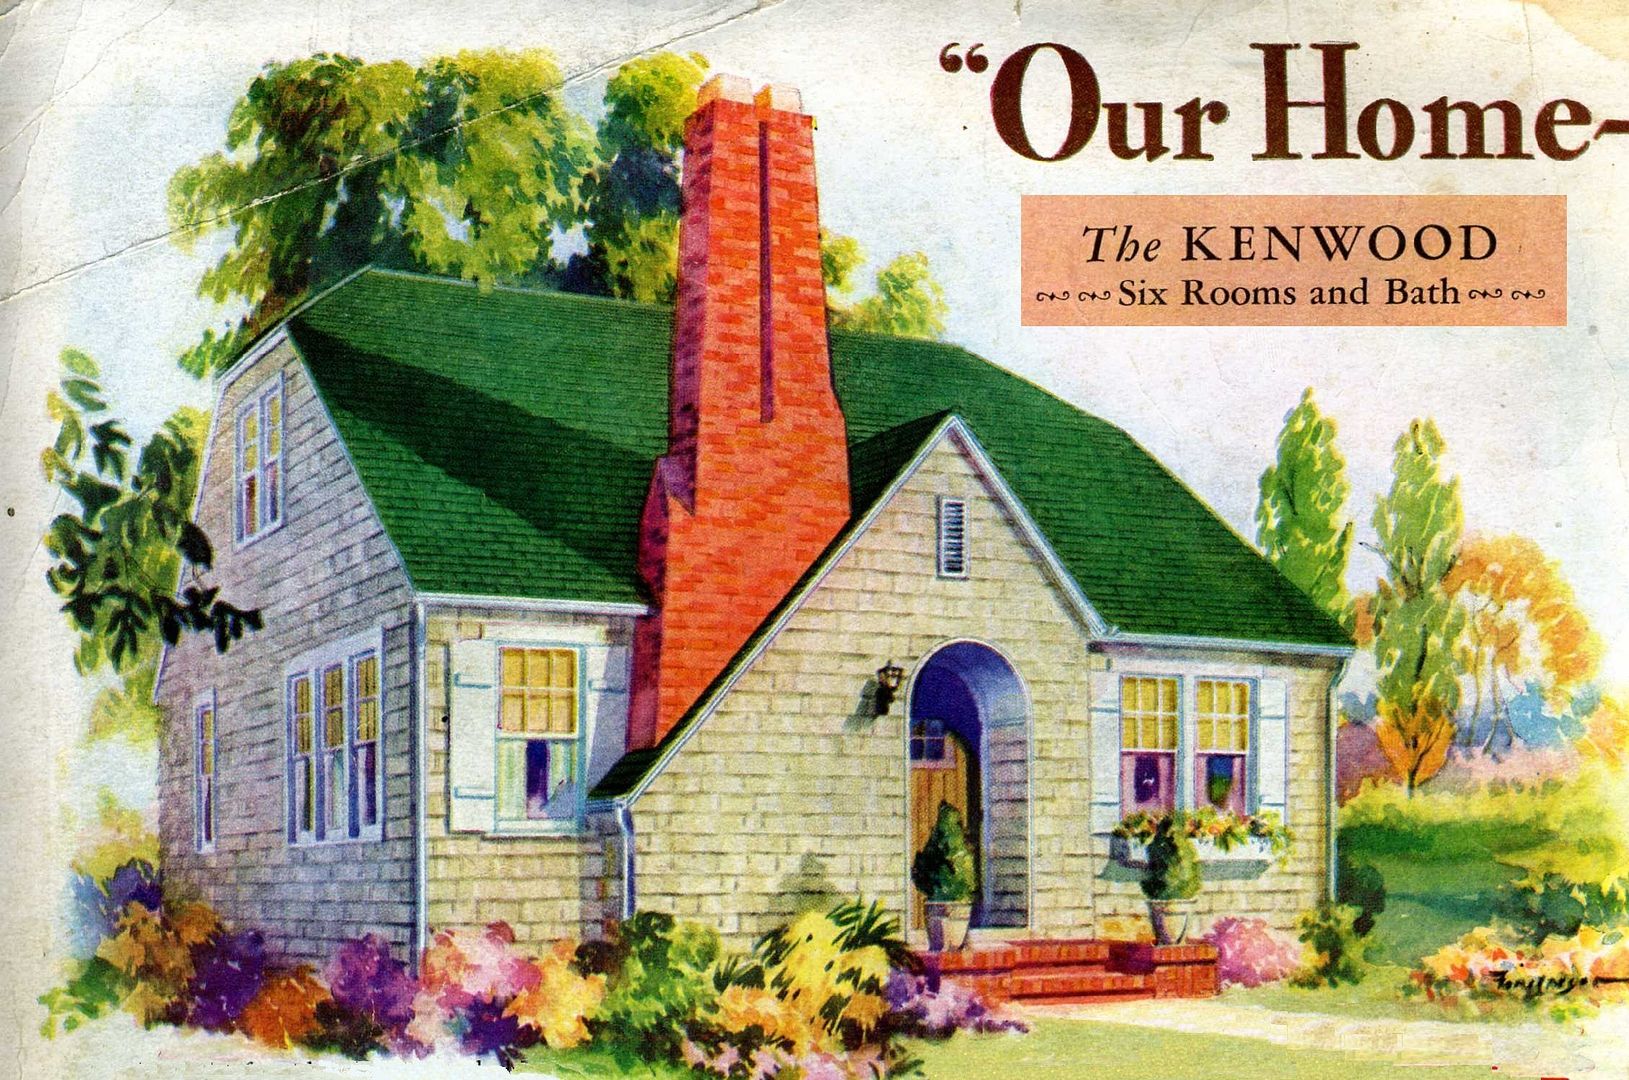 The Kenwood, as seen in the 1929 Wardway catalog. As with the Cranford and the Devonshire, the Kenwood was exclusively a Wardway home (milled, manufactured and shipped by Gordon Van Tine).